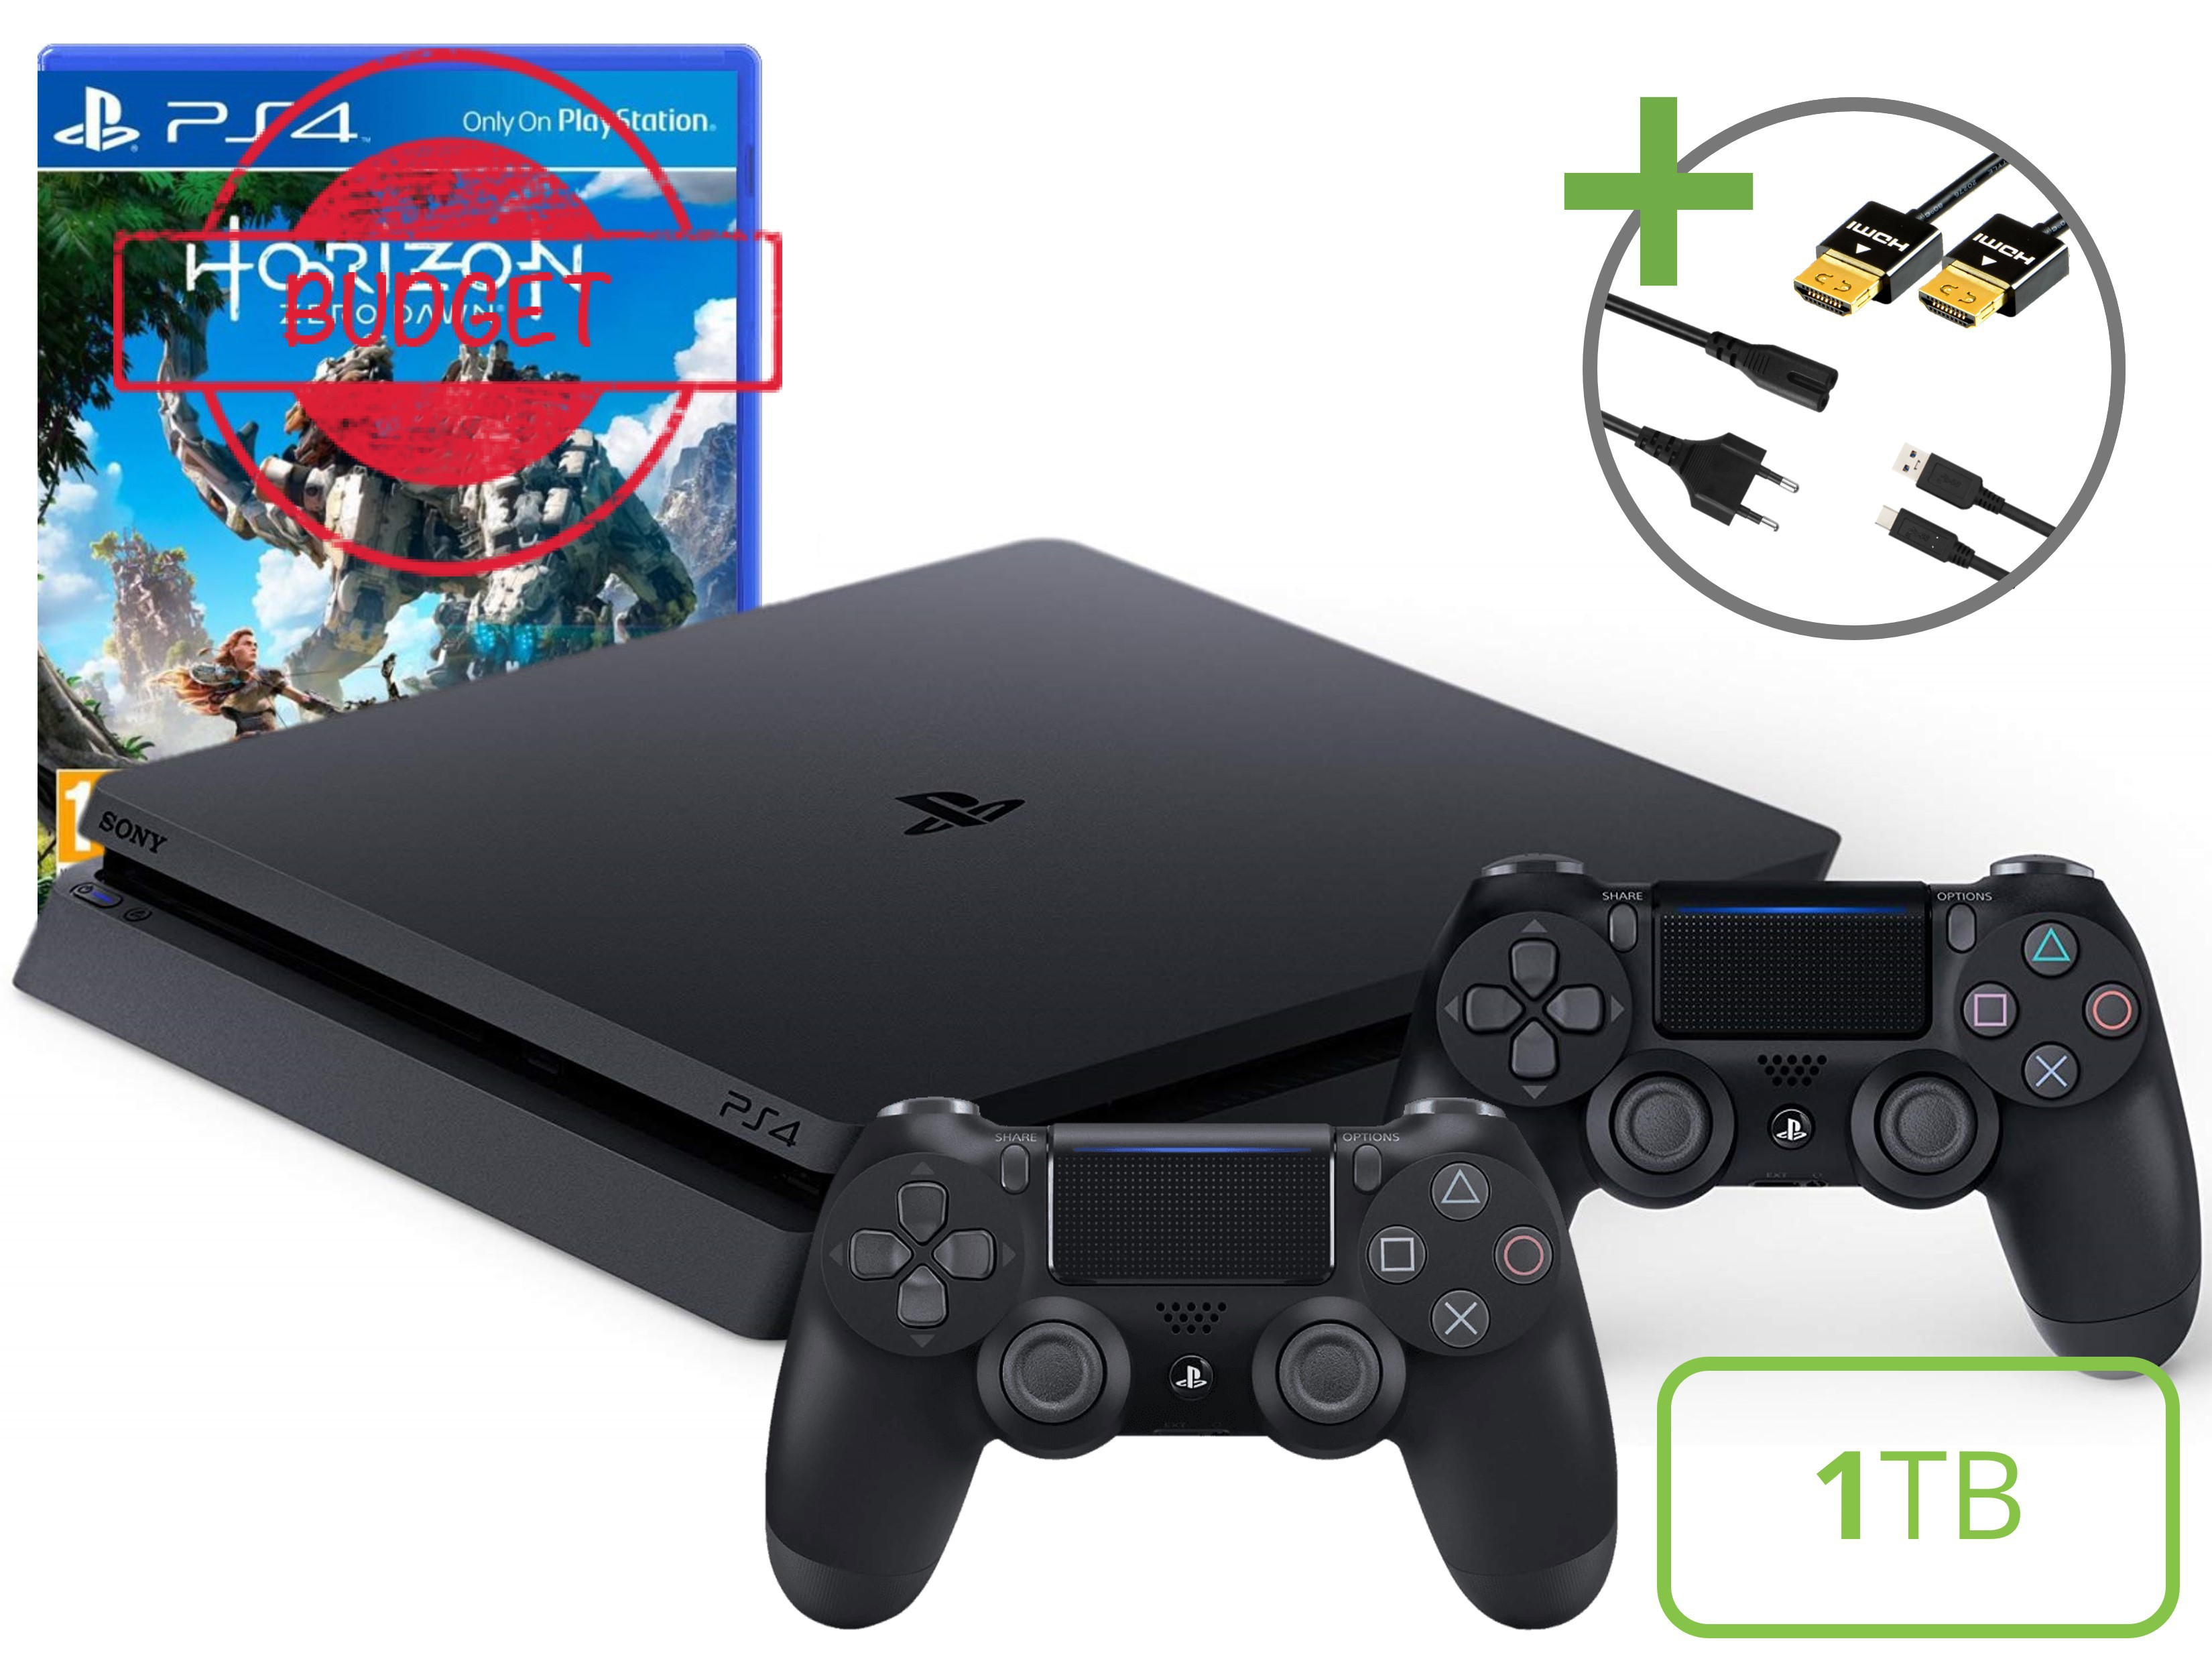 Sony PlayStation 4 Slim Starter Pack - 1TB Two Player Horizon Edition - Budget Kopen | Playstation 4 Hardware